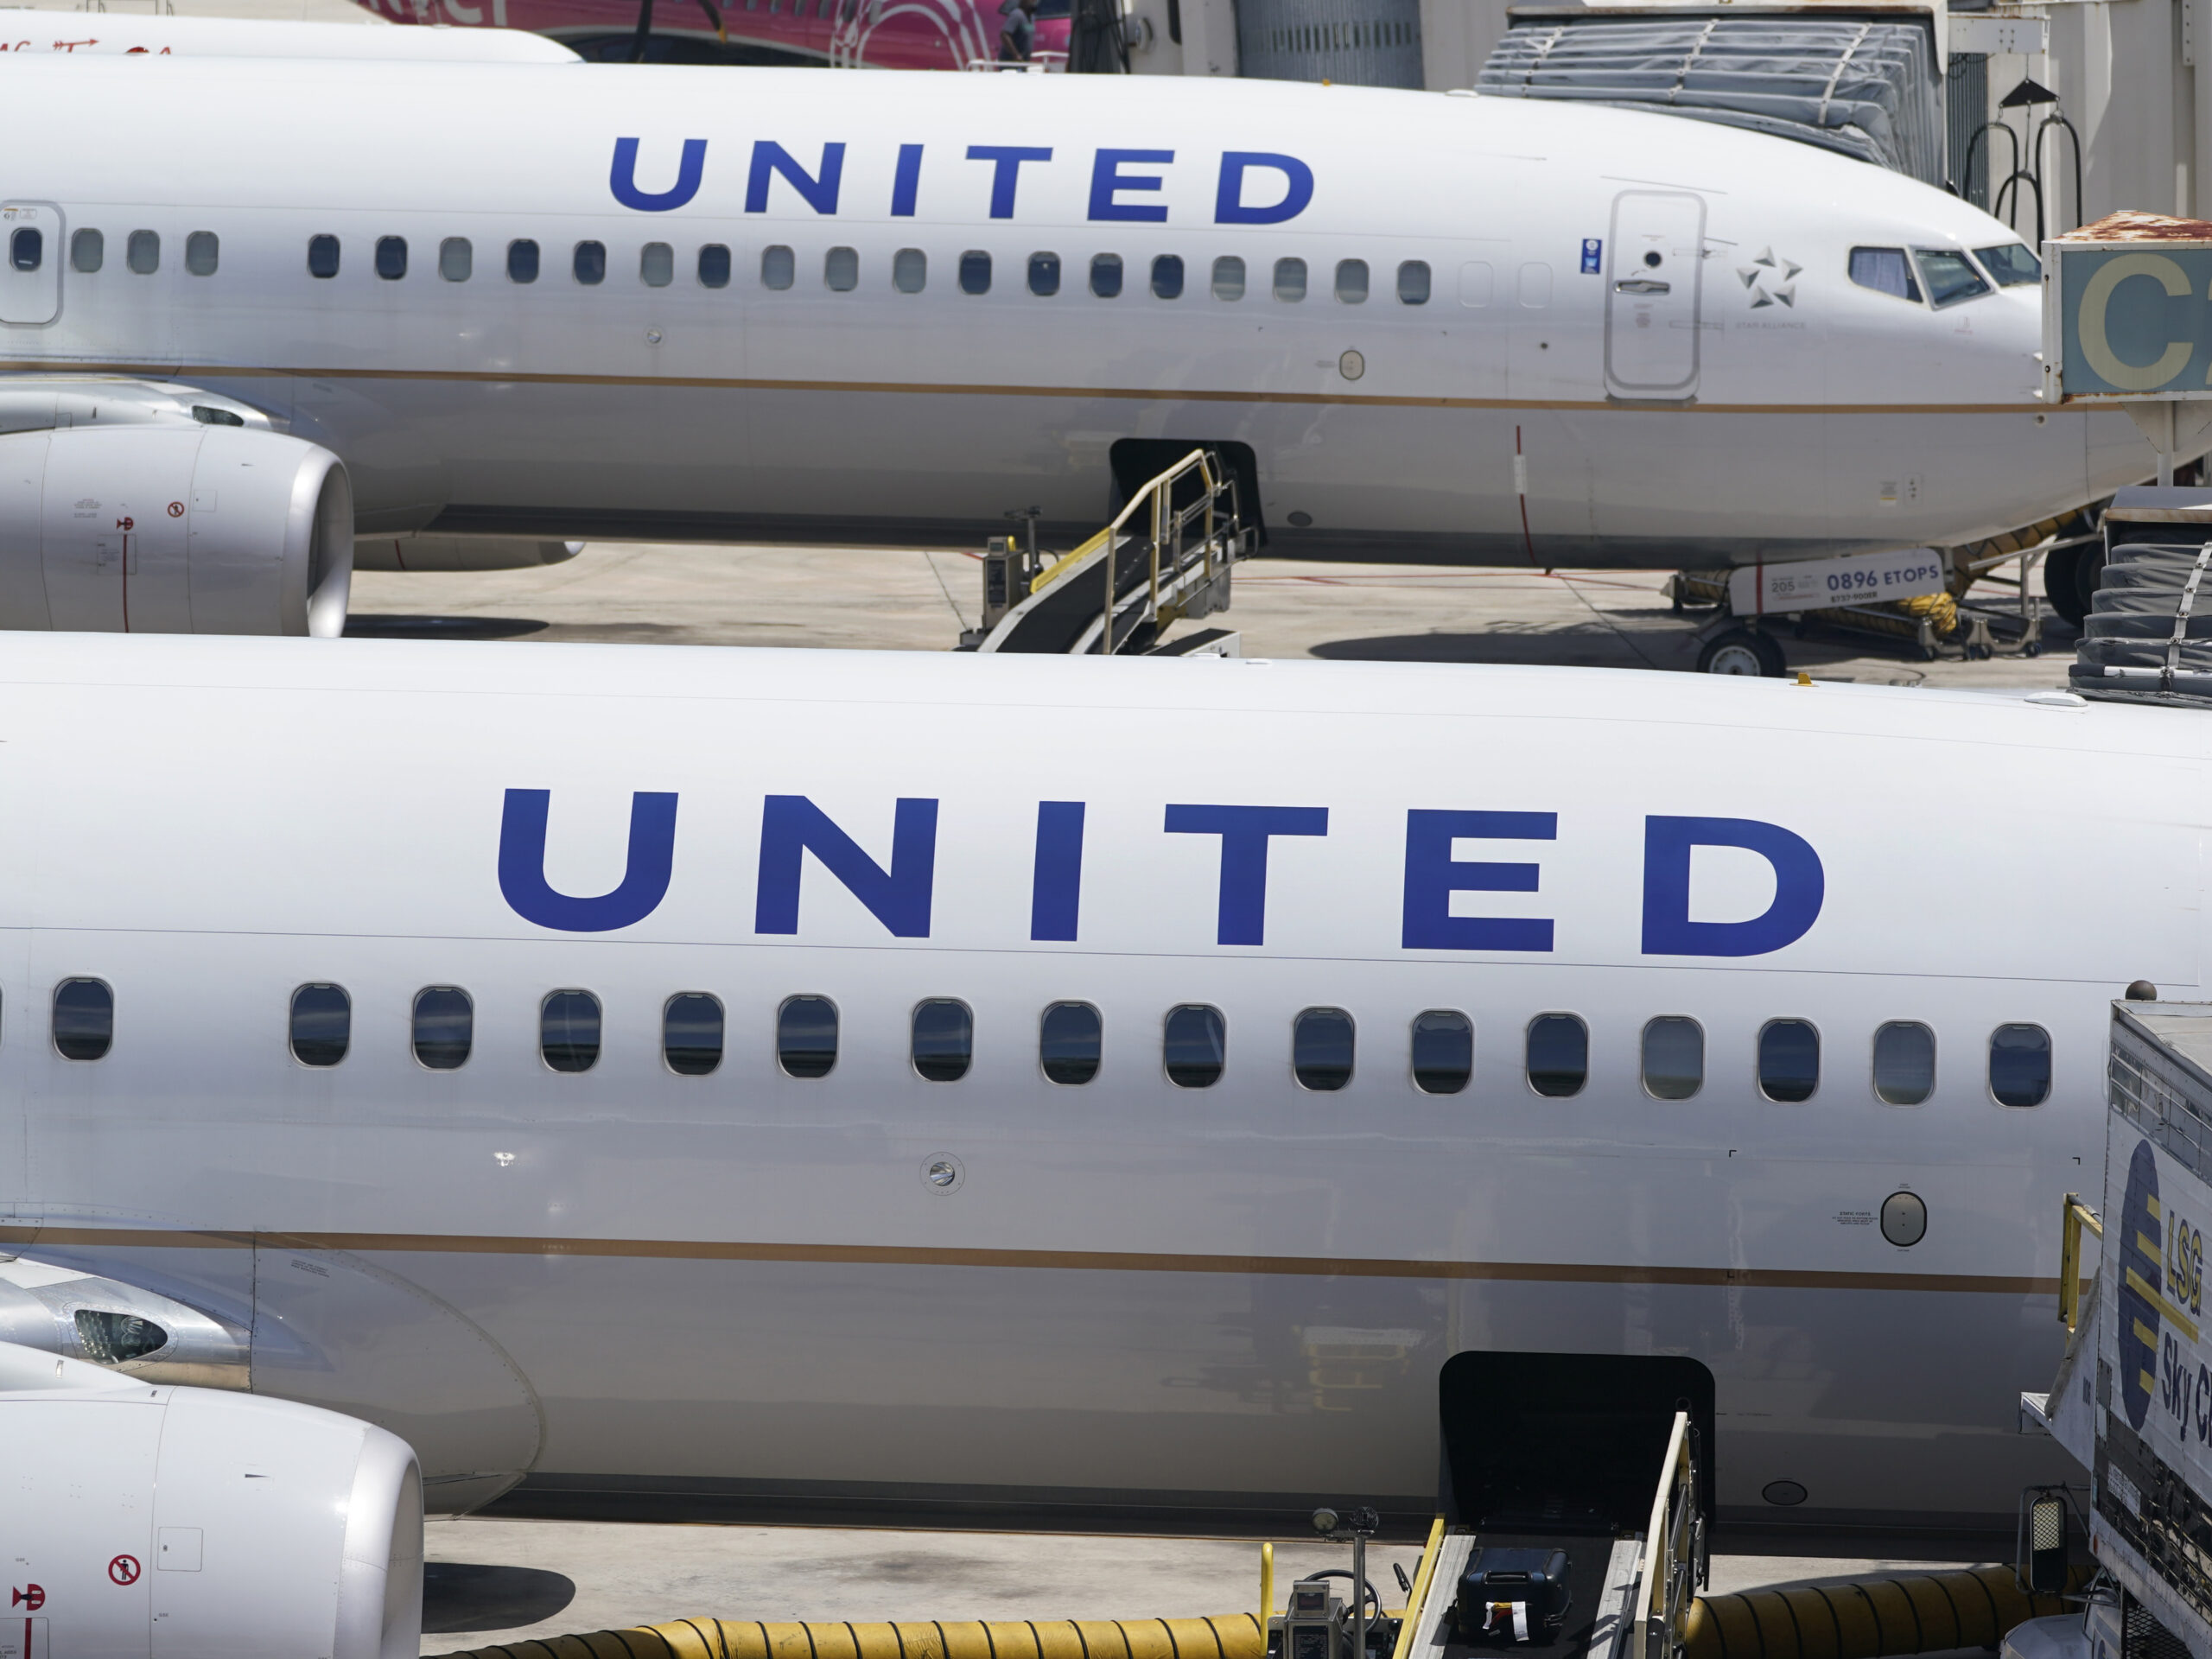 United Airlines says federal regulators will increase oversight of the company